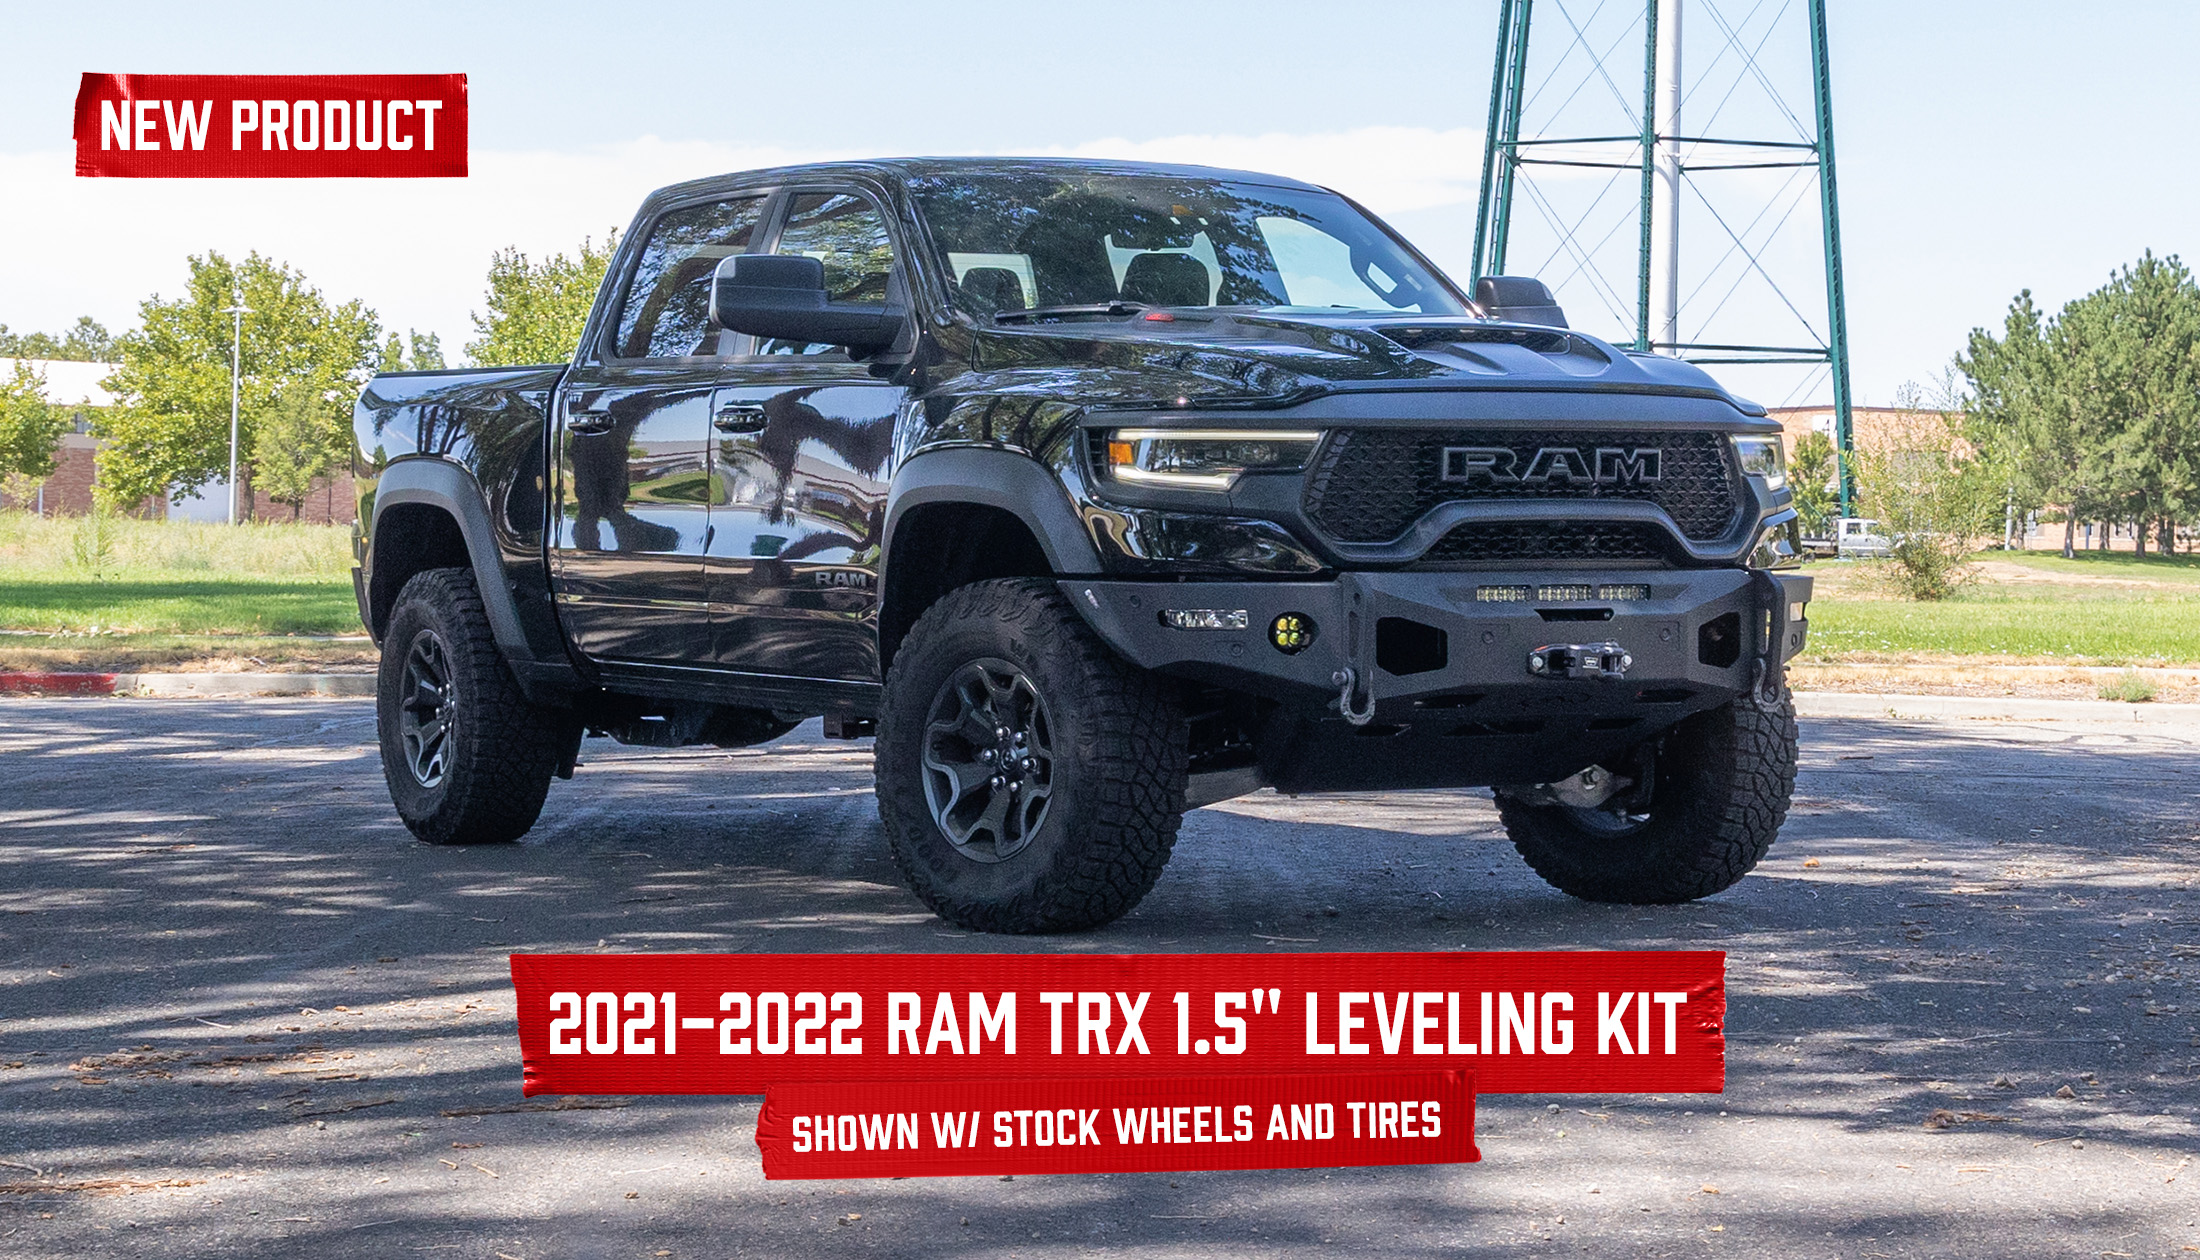 ReadyLIFT offers a new leveling kit to properly enhance the stance and driving quality of the 2021-2022 Ram 1500 TRX. The 66-11150 kit provides 1.5" of front leveling lift. Like the body design and monster powertrain, the suspension of the new Ram TRX features some unique elements that require a different leveling solution than a traditional Ram 1500 would typically receive. These differences were tackled by our engineers. As a result, we now offer a CNC machined billet Aluminum construction leveling kit. Features and Benefits: • 2021-2022 Ram 1500 TRX 1.5-inch Leveling Kit • Front pre-load spacer kit • CNC machined billet Aluminum construction • Max tire: 35x12.50 on a 20x9 +18 offset NOTE: This kit fits Ram 1500 TRX only. Not for use on Ram 1500 TRX equipped with aftermarket coilovers. The use of pre-load spacer technology to achieve front lift is safe and effective; however, this method may deliver a firmer ride than the factory tuning.